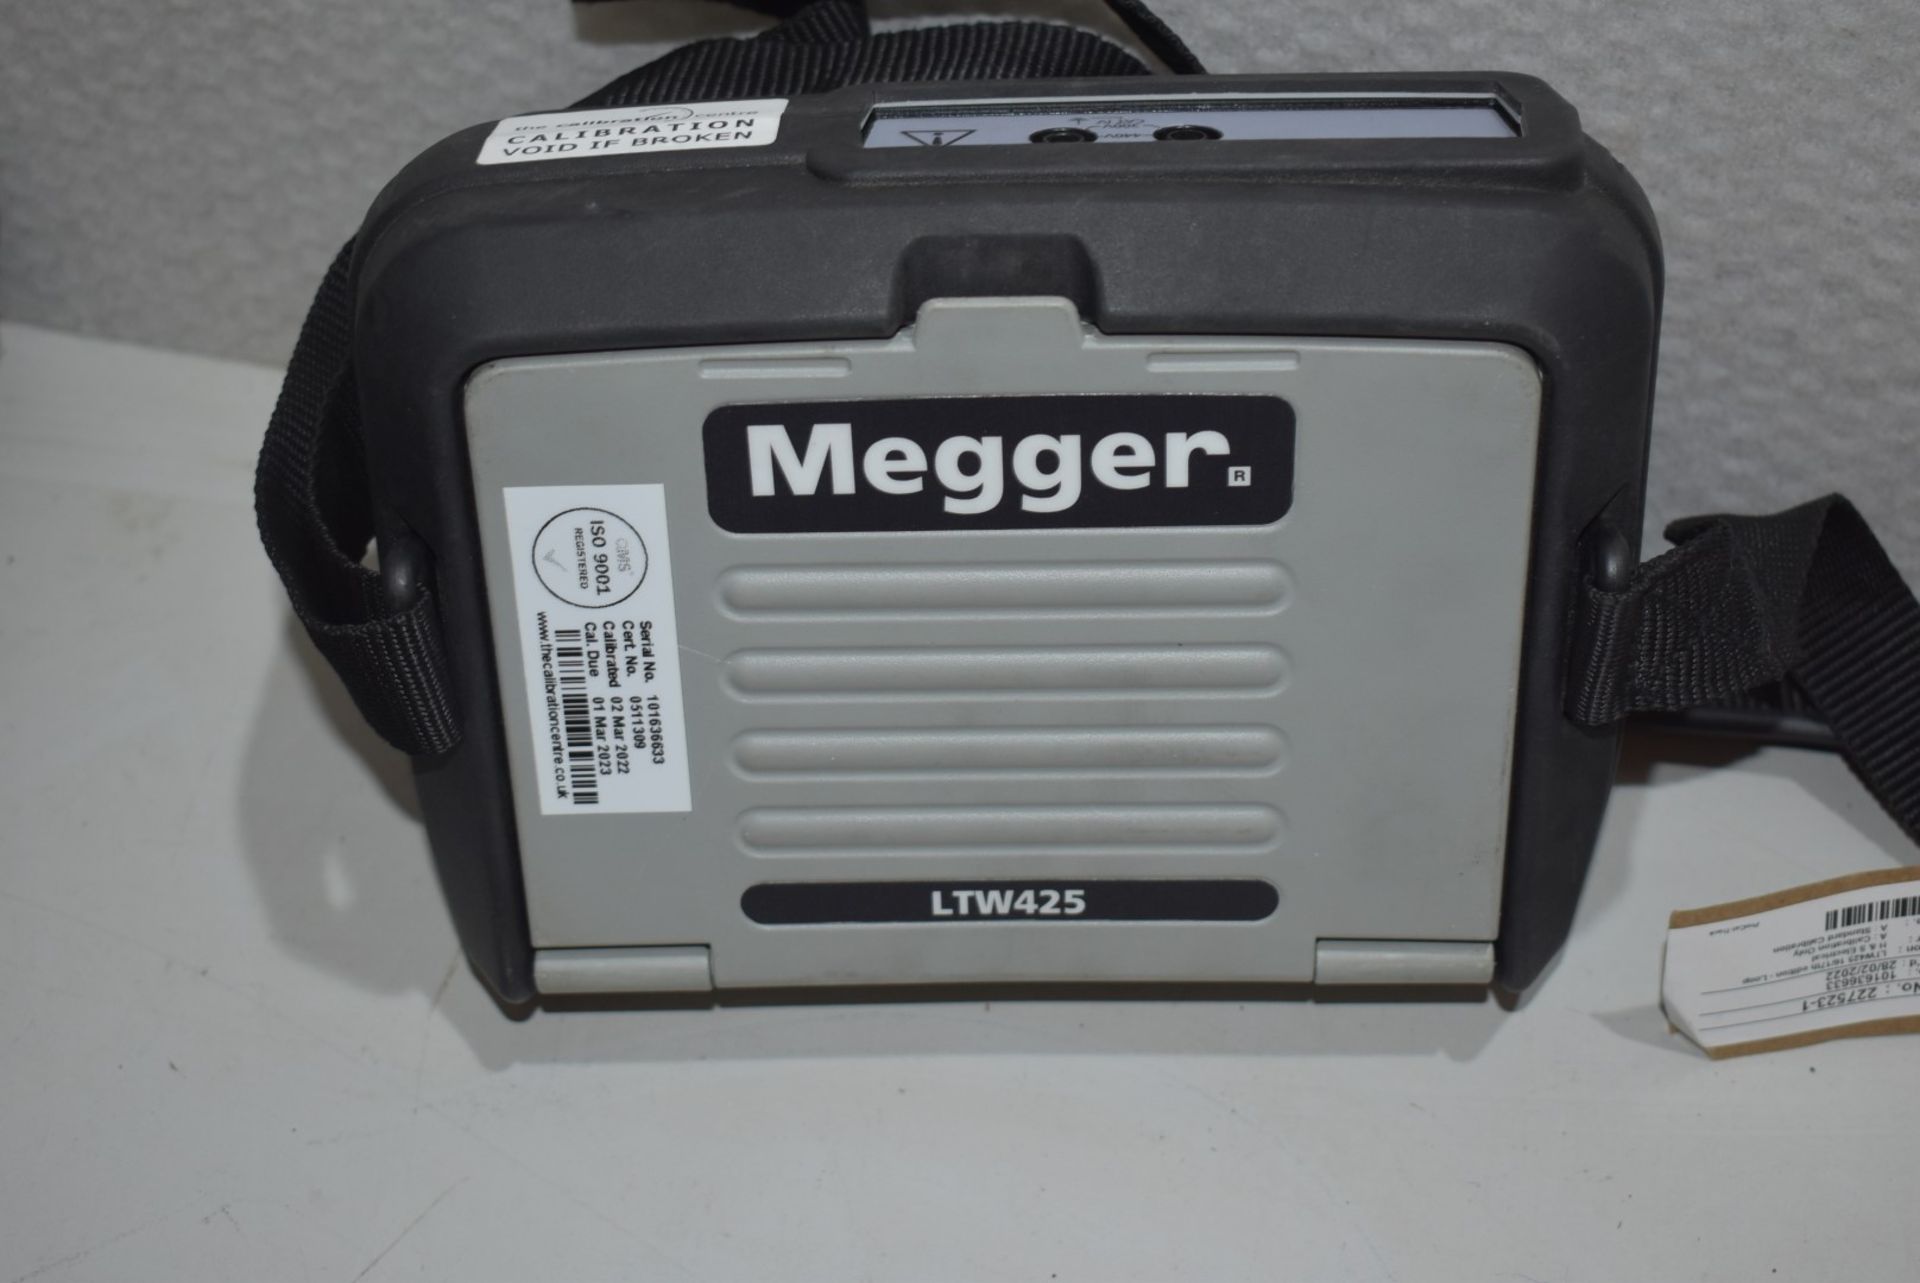 1 x MEGGER LTW425 Two-wire Non-tripping High Resolution Loop Tester - Ref: DS7549 ALT - CL816 - - Image 3 of 7